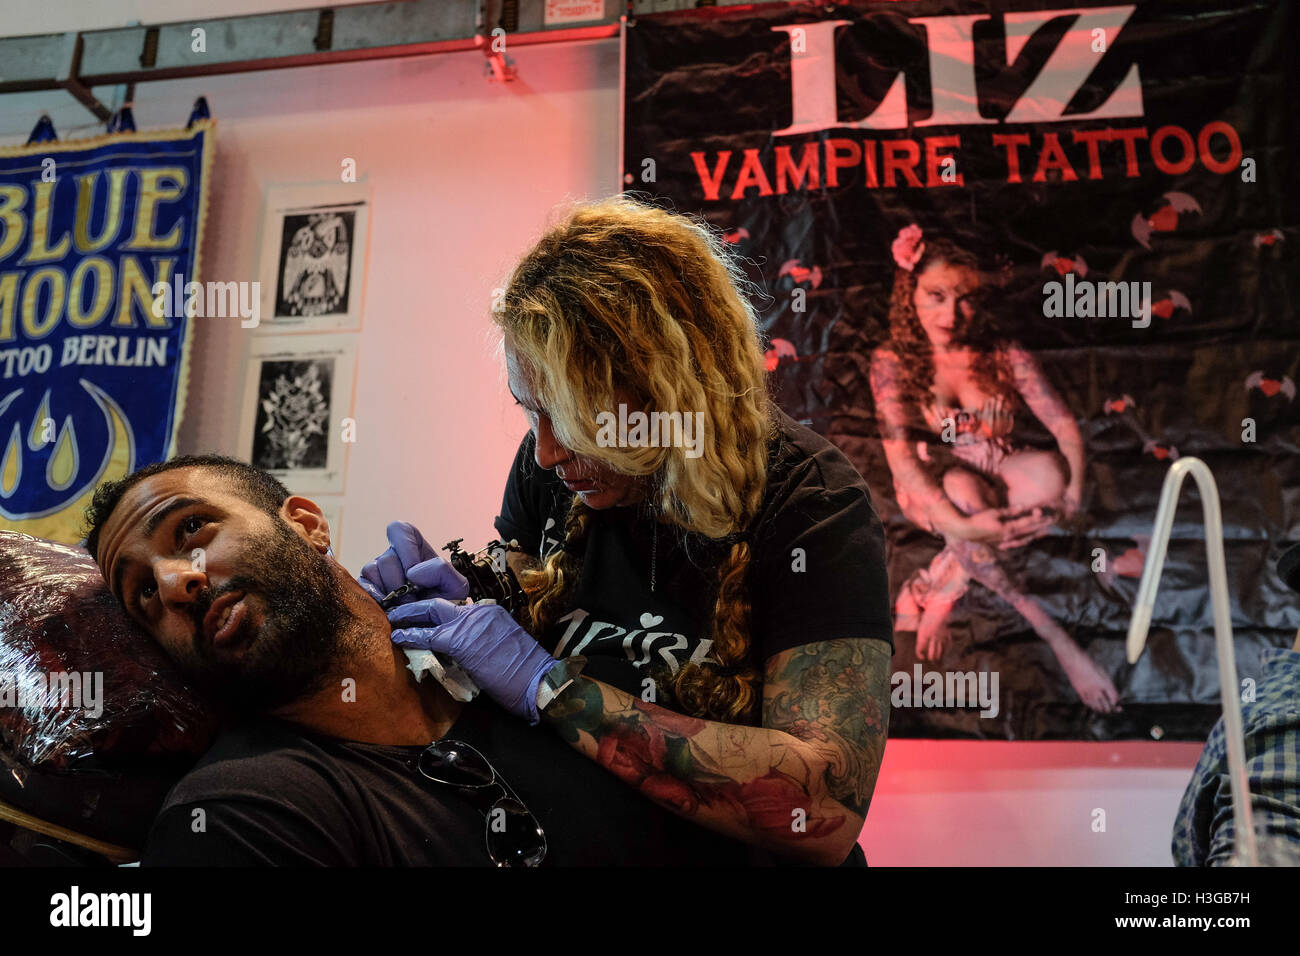 Tel Aviv, Israel. 7th October, 2016. Liz, Vampire Tattoo, tattoos a man's neck. Tattoo and piercing artists from around the world join dozens of leading Israeli artists and visiting enthusiasts at the